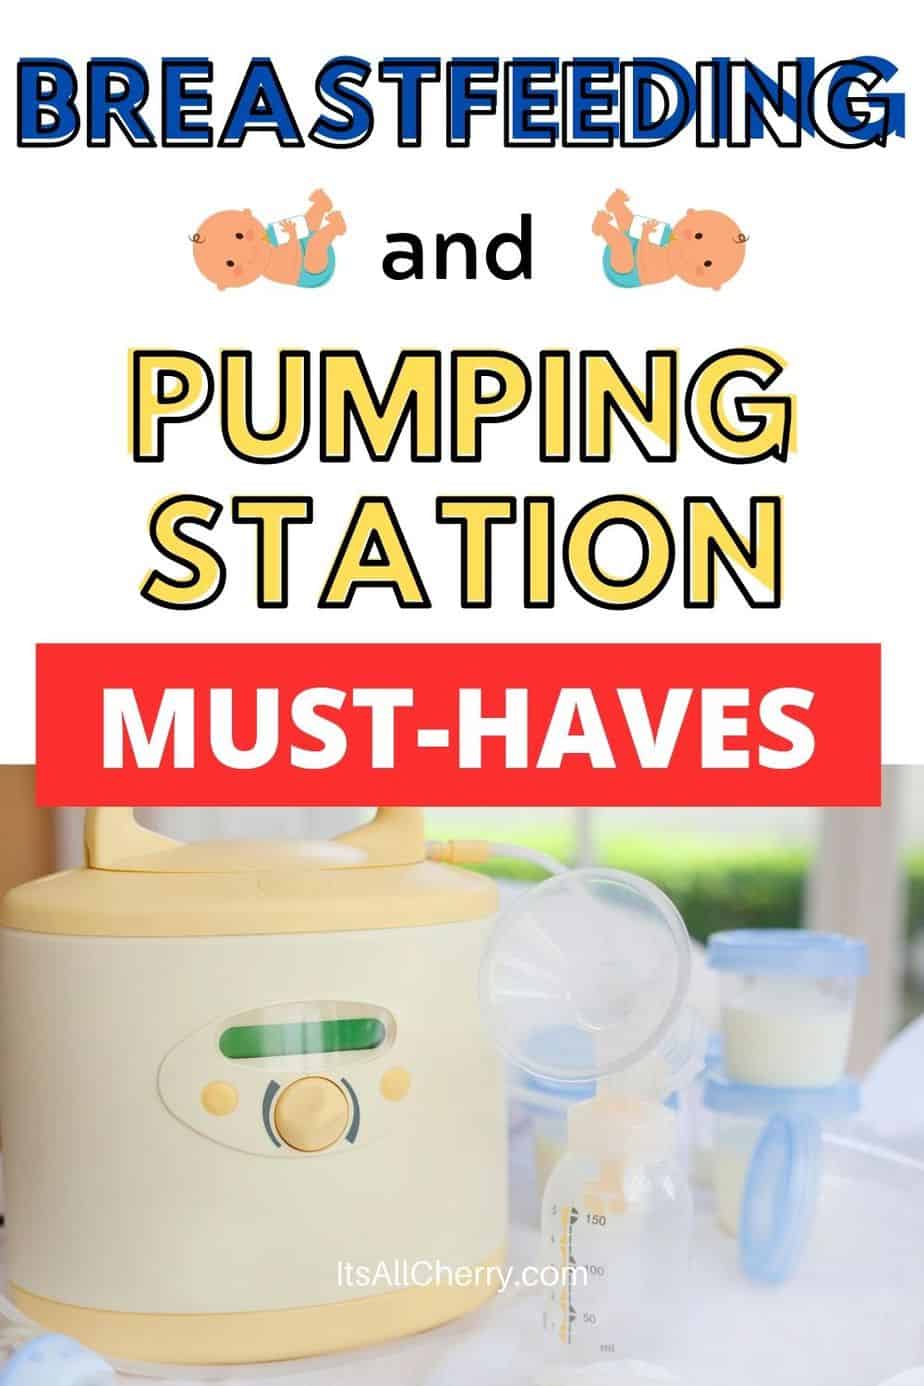 6 Breastfeeding And Pumping Station Must-Haves (for Small Spaces)